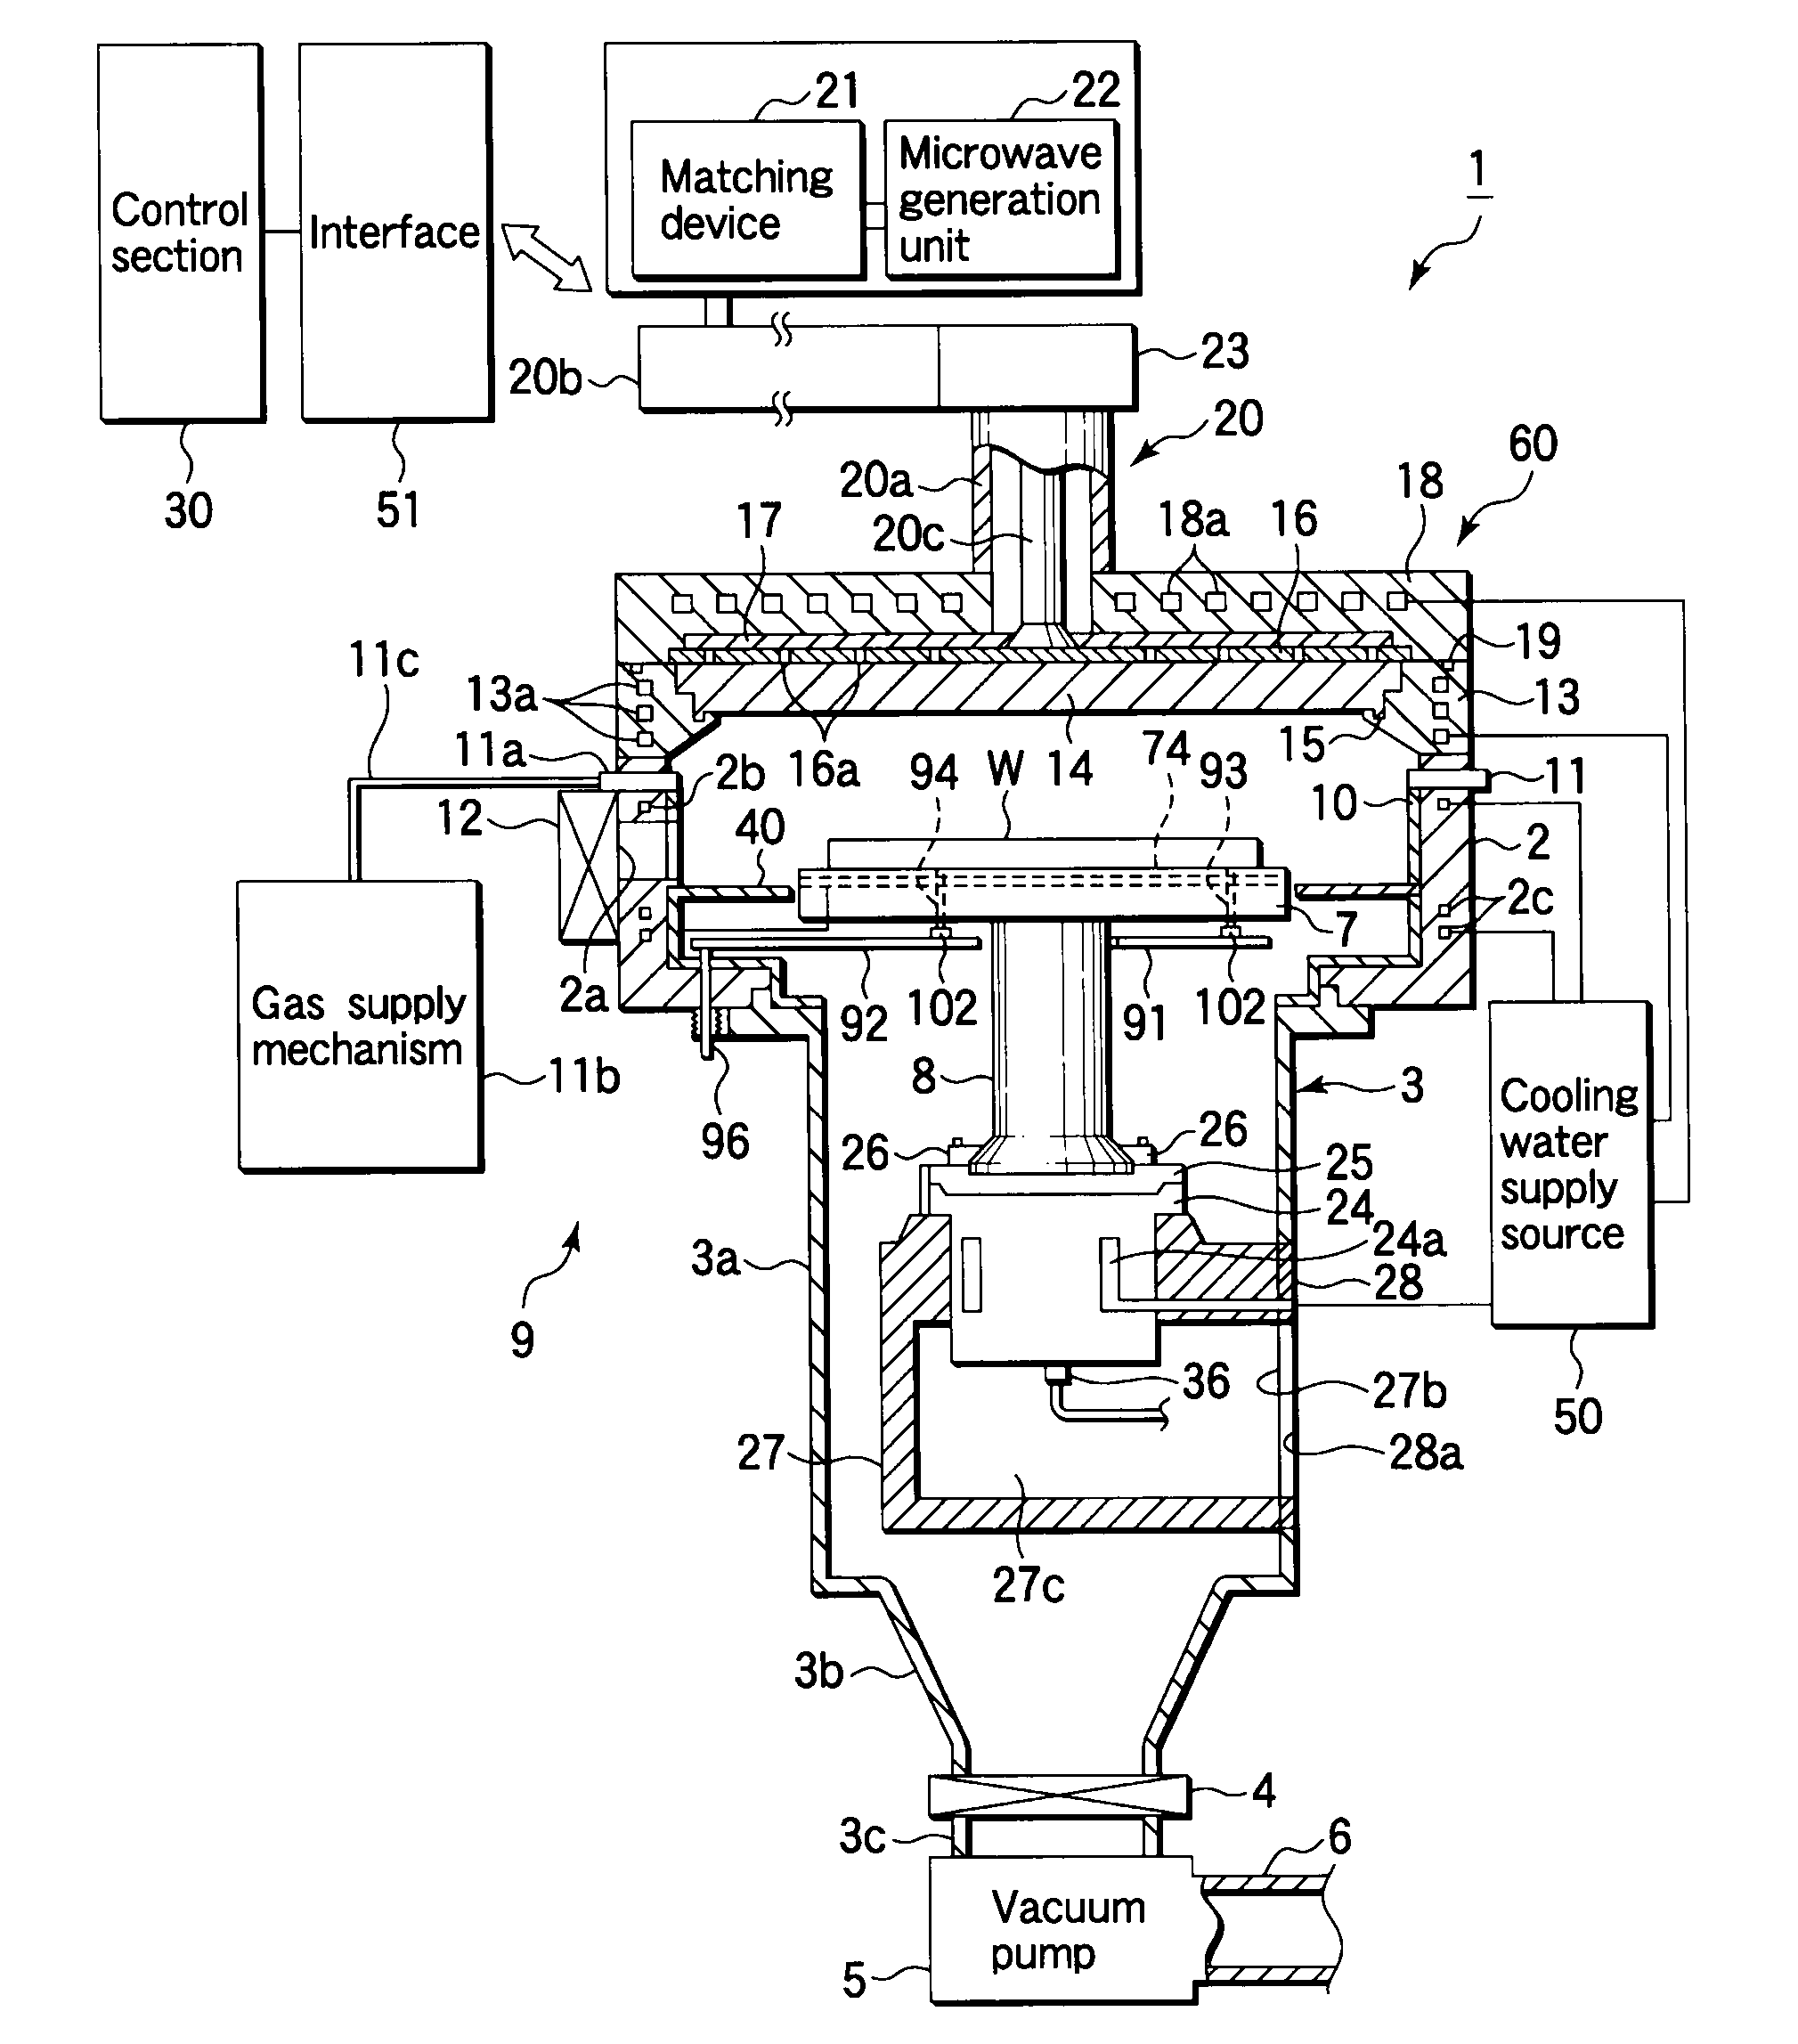 Plasma treatment apparatus, and substrate heating mechanism to be used in the apparatus